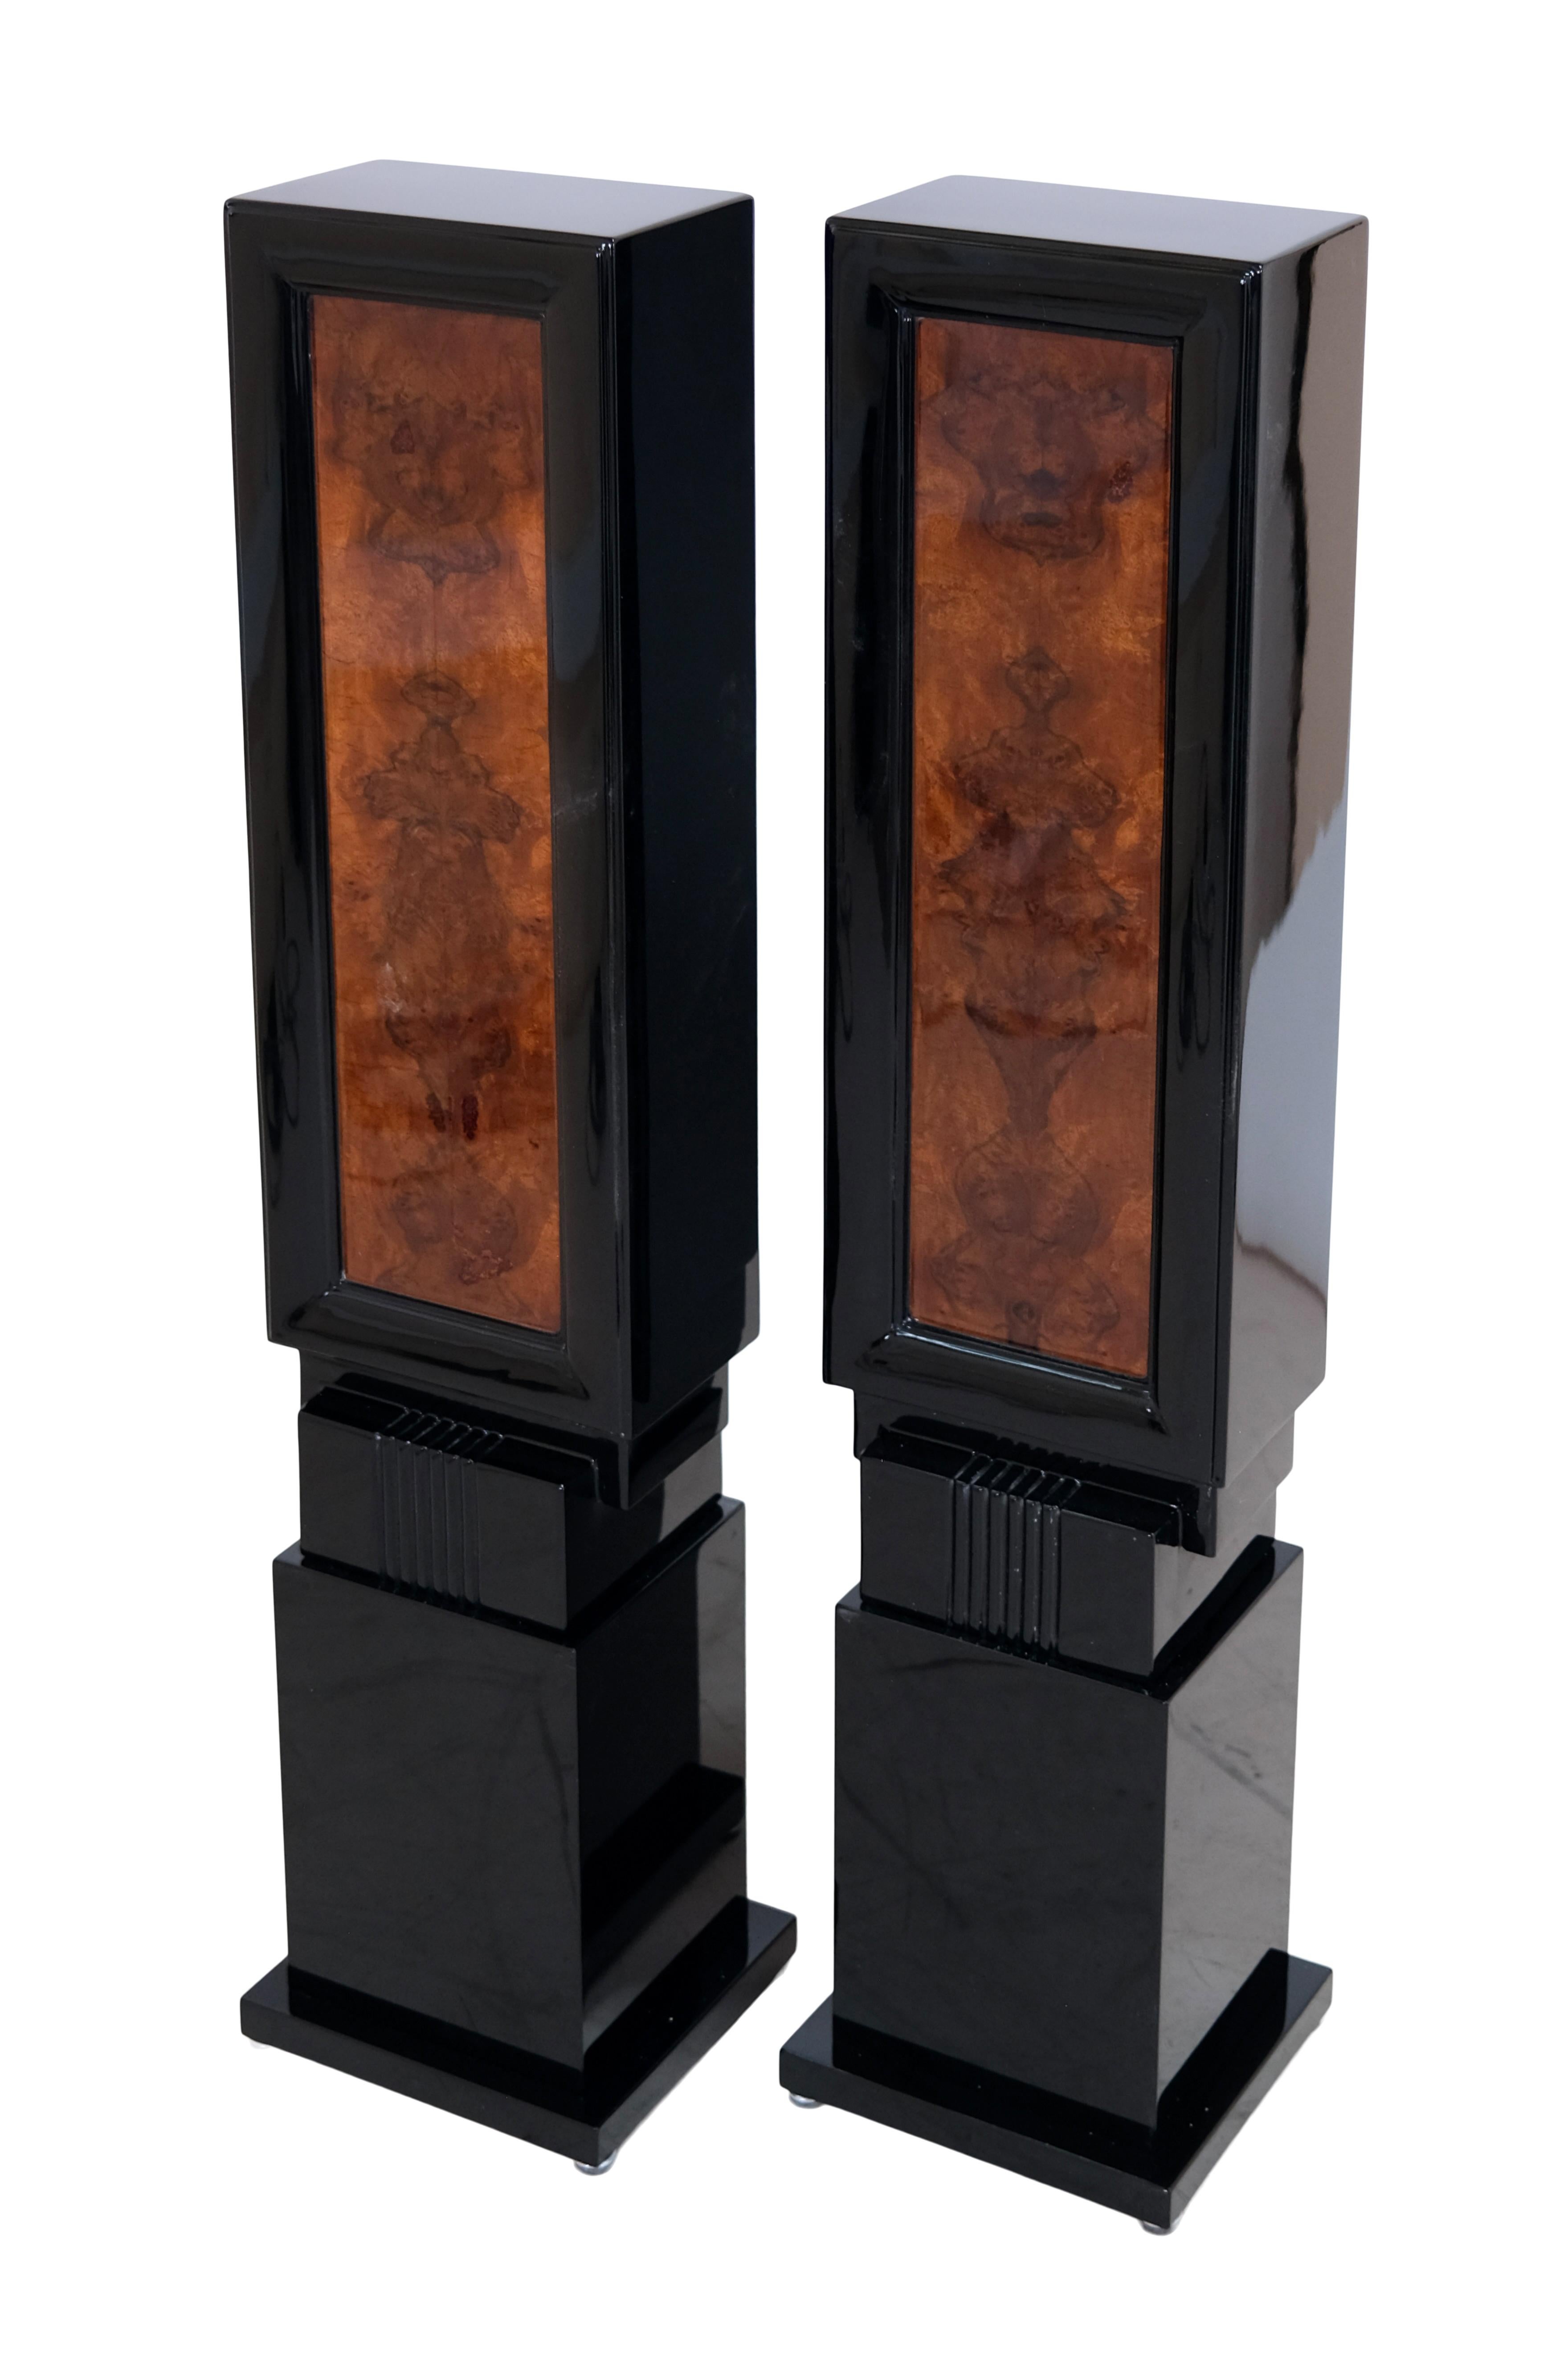 Pair of 1930s French Art Deco Columns in Nutwood and Black Lacquer For Sale 1